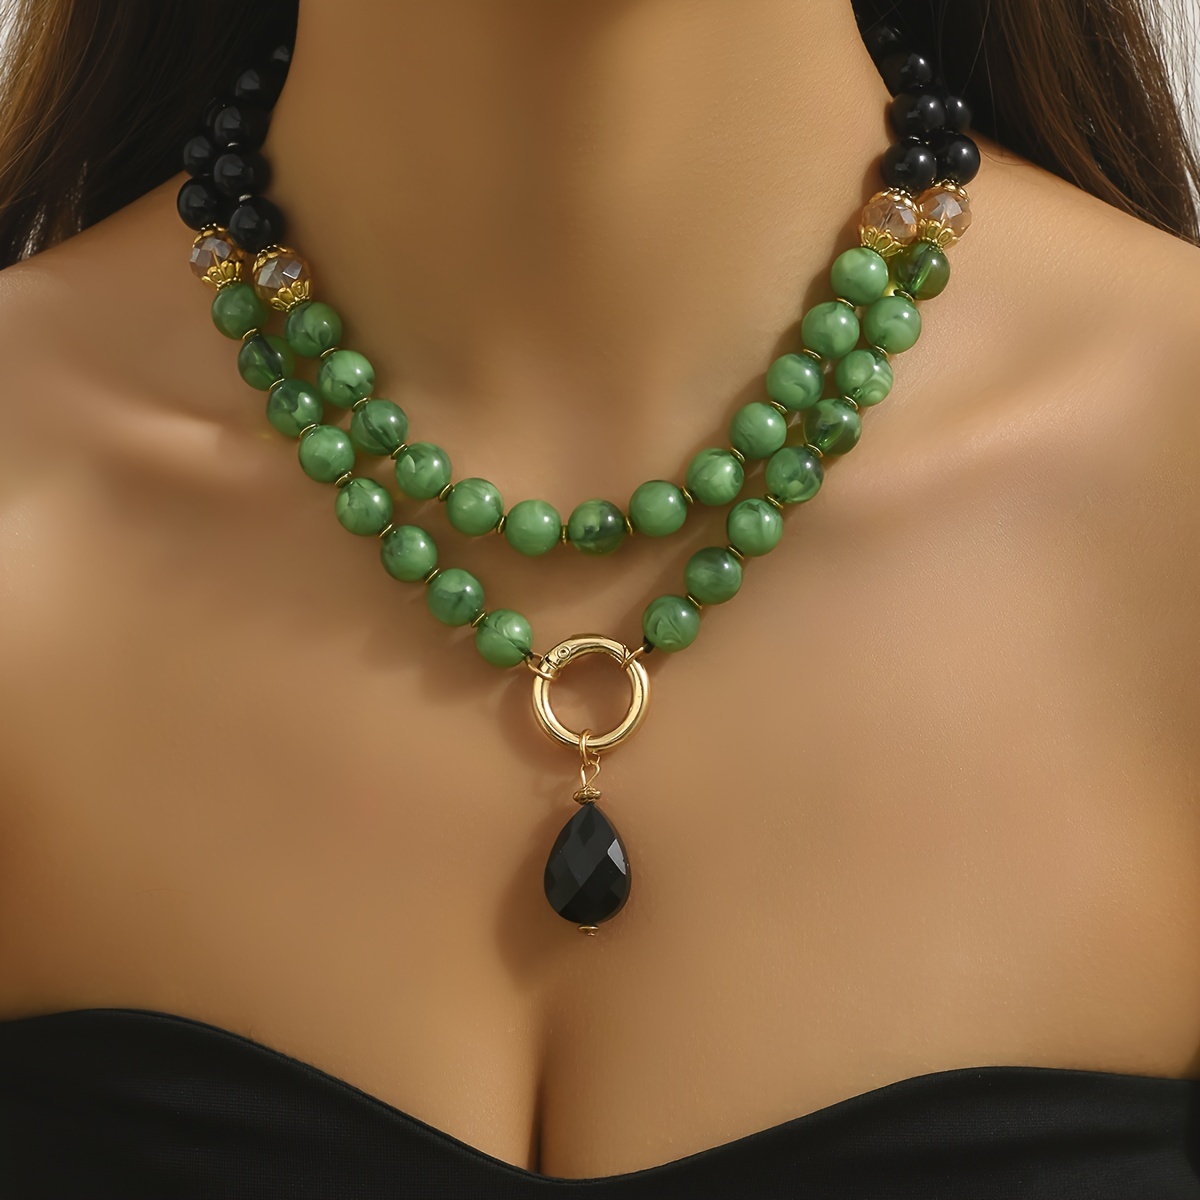 

1pc Boho Style Double Layers Beaded Necklace With Black & Green Color Faux Stone Beads Elegant Neck Chain Jewelry Accessory